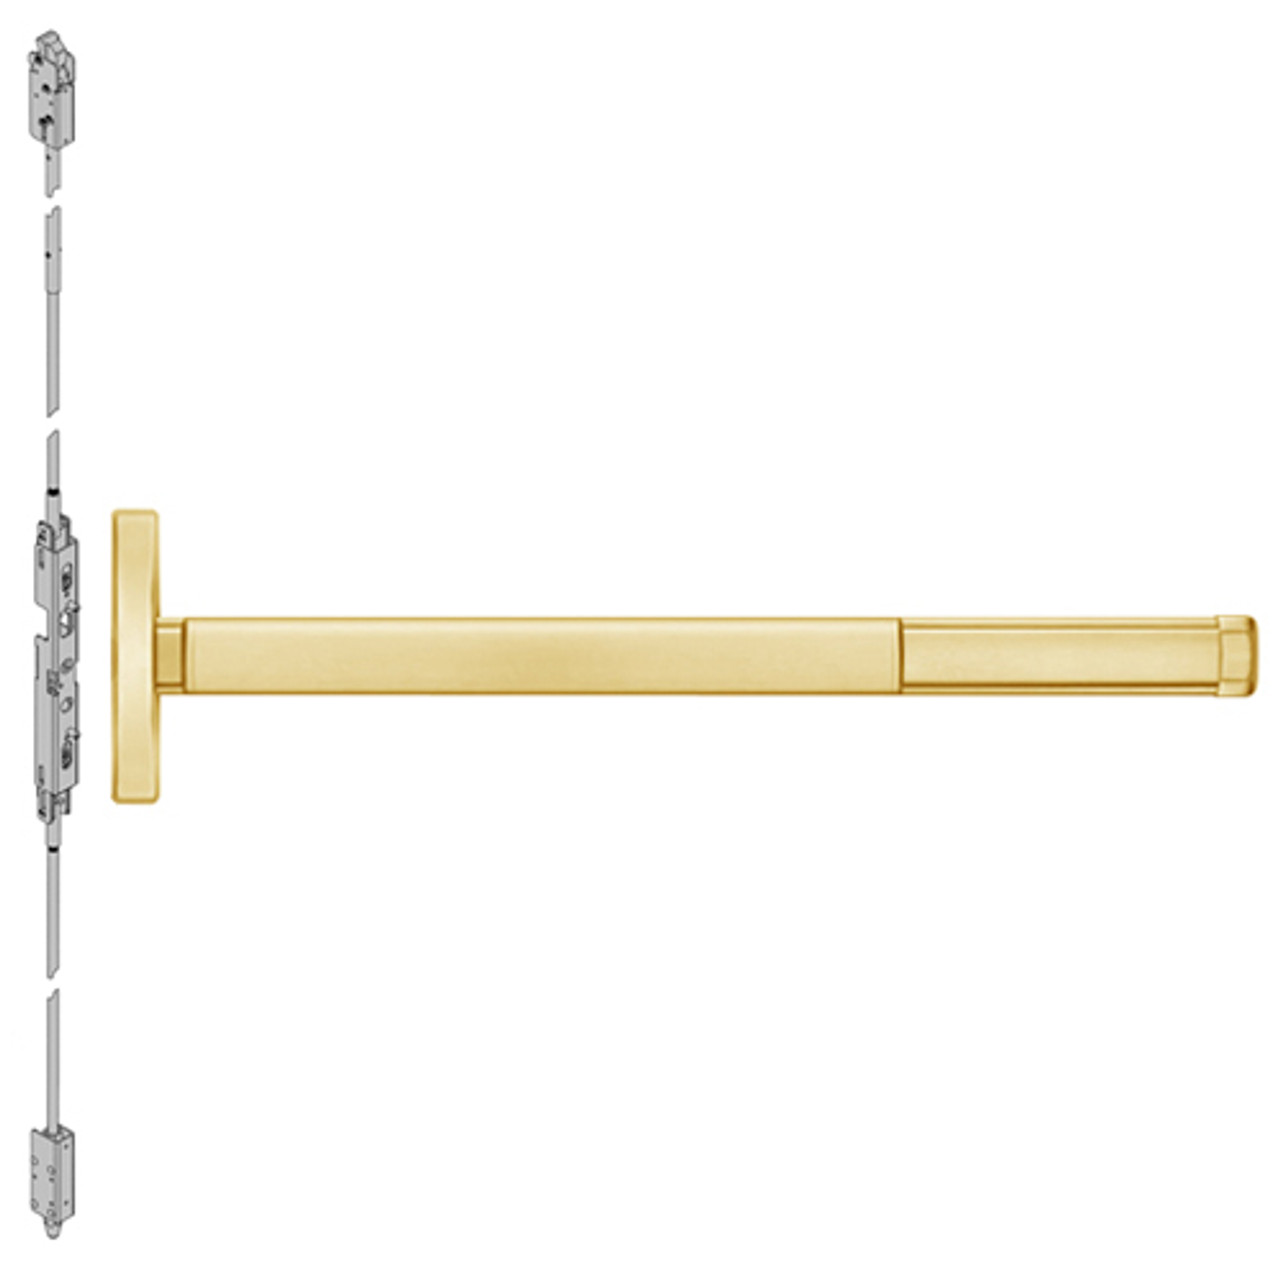 ELRFL2602-605-48 PHI 2600 Series Fire Rated Concealed Vertical Rod Exit Device with Electric Latch Retraction Prepped for Dummy Trim in Bright Brass Finish